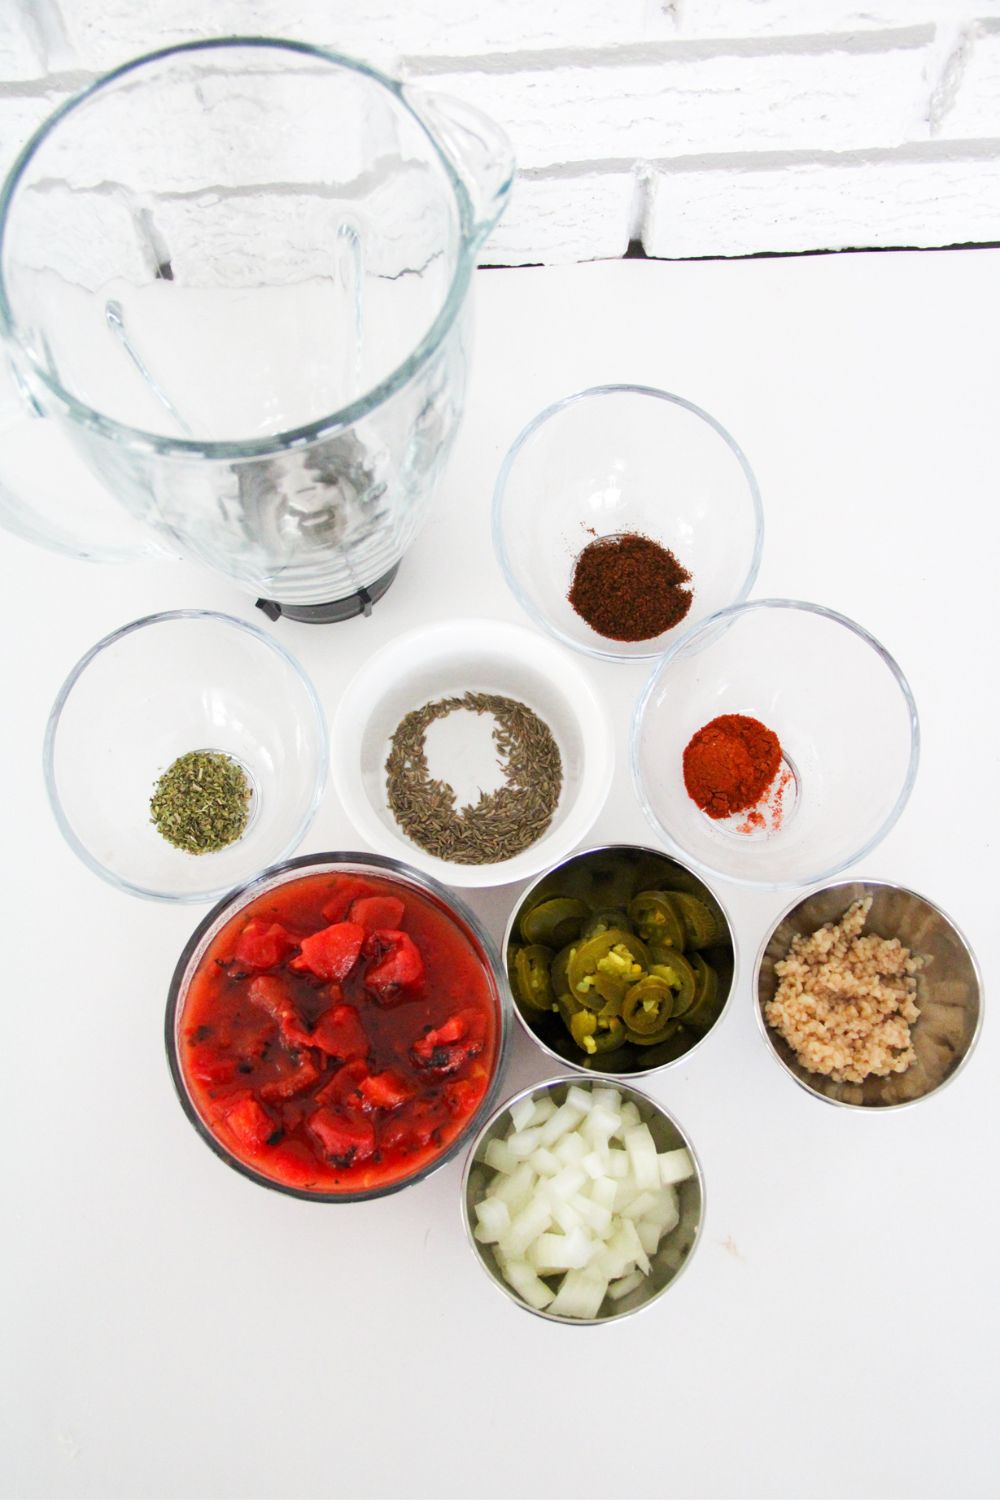 ingredients in individual bowls before being put into blender